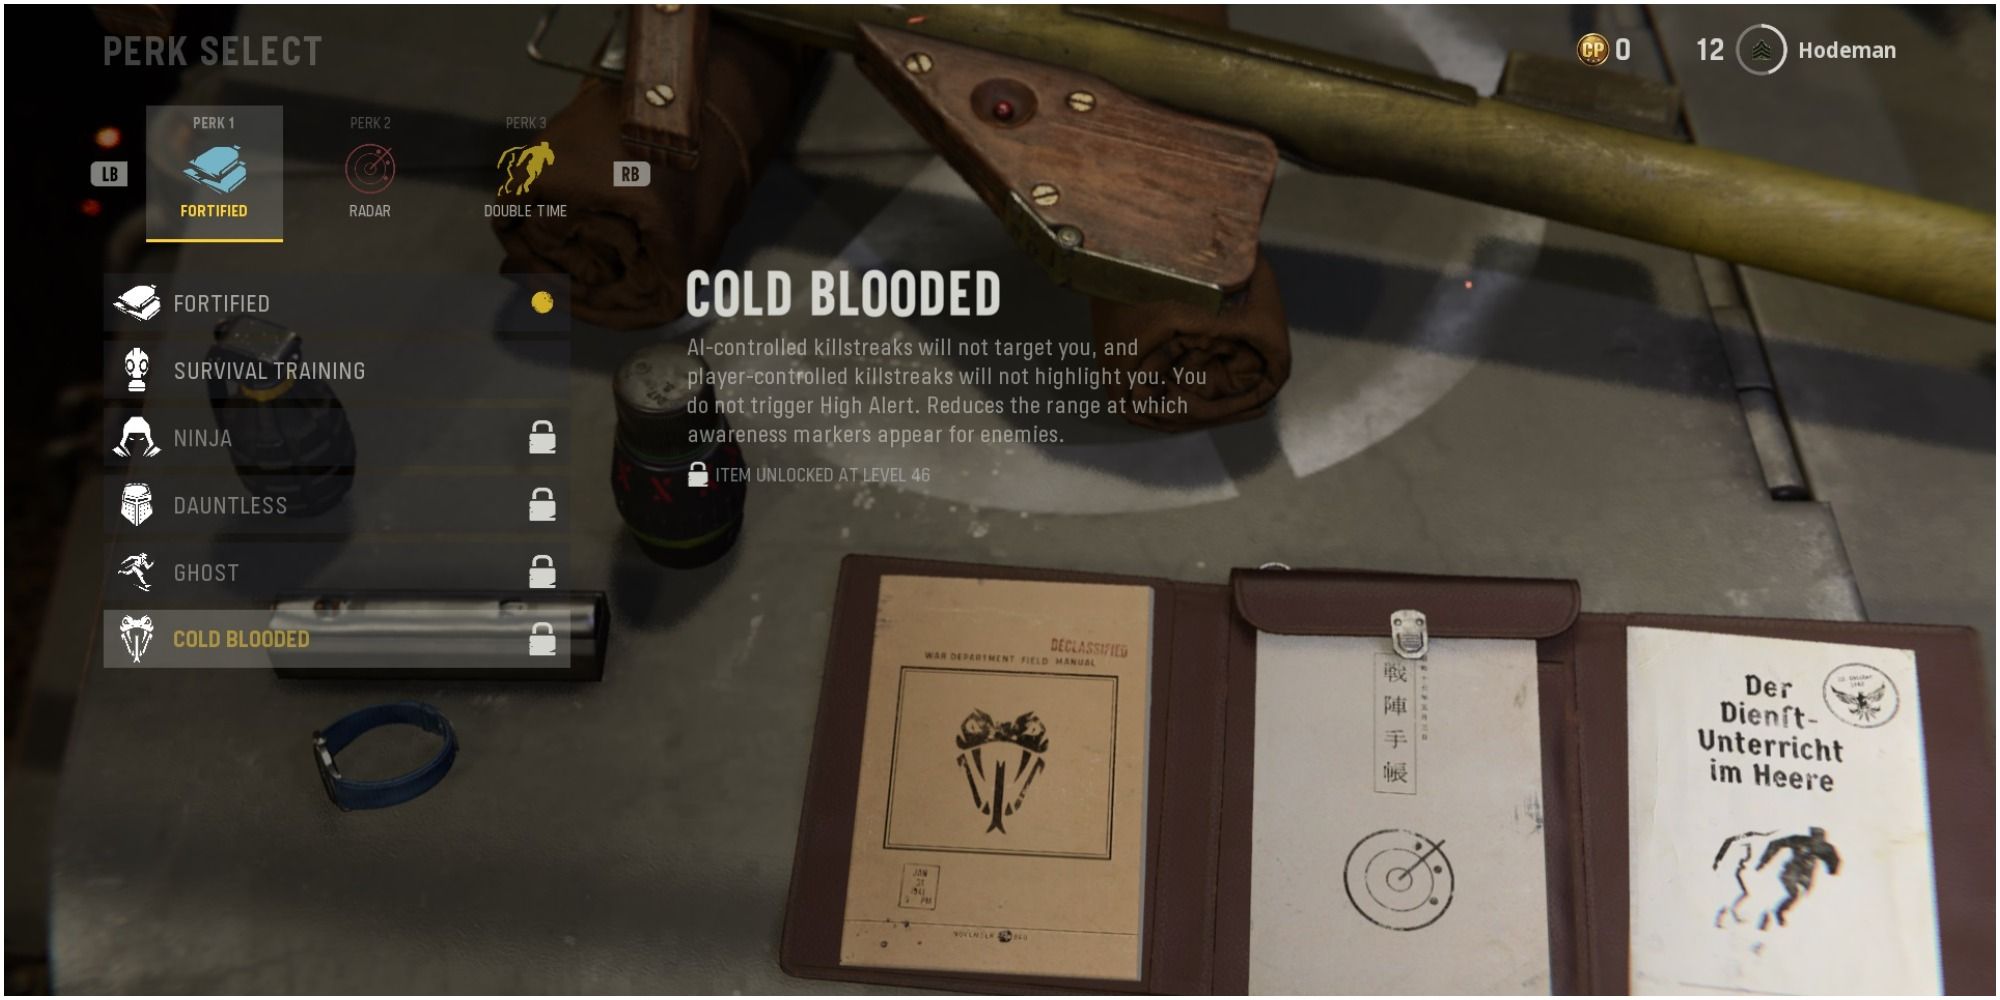 Call Of Duty Vanguard Reading The Cold Blooded Perk 1 Description